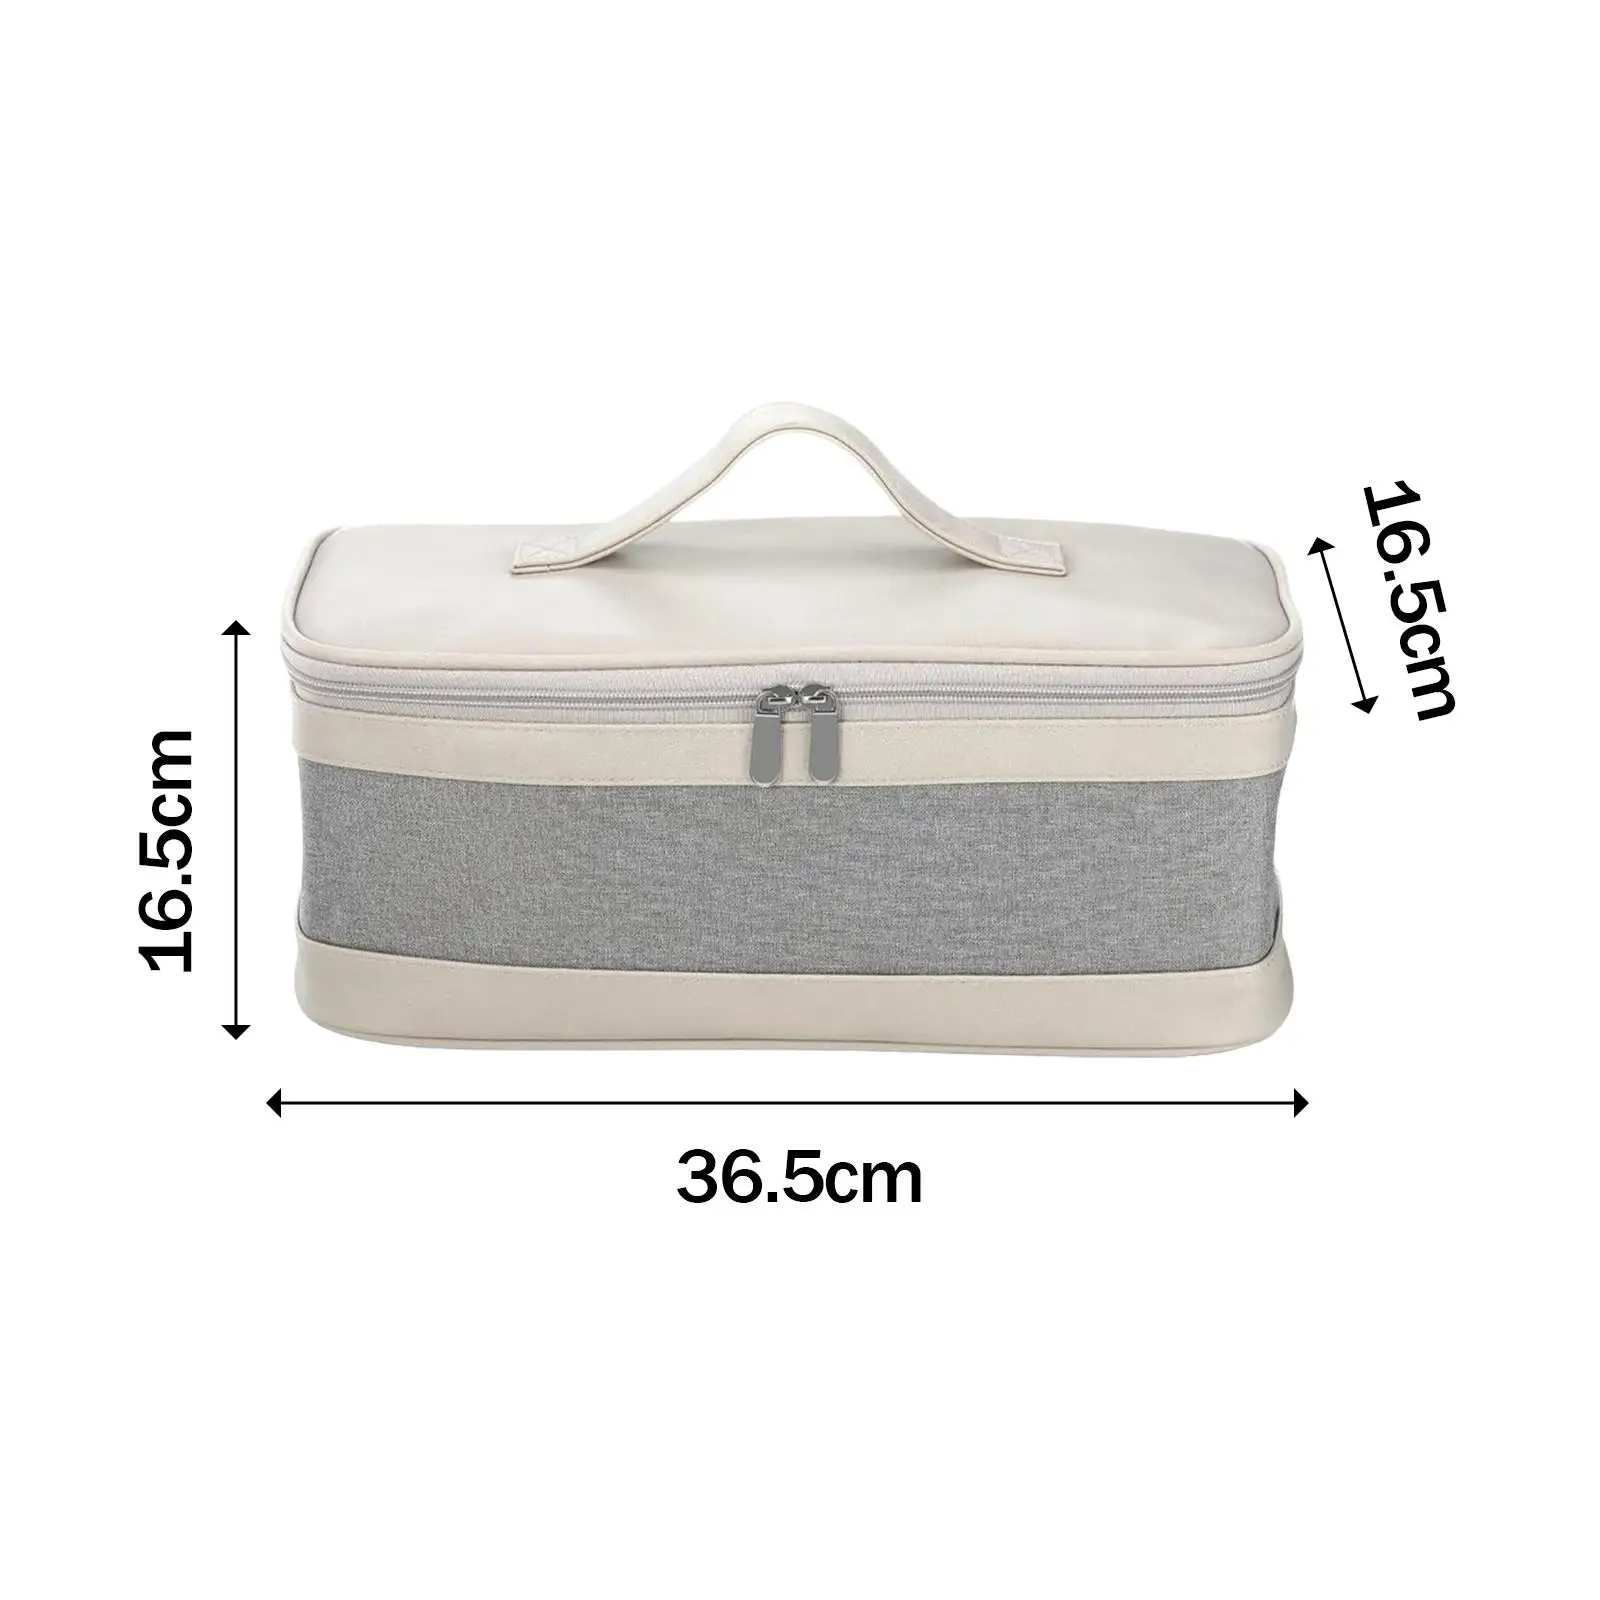 Hair Dryer Travel Carrying Case Large Capacity Organizer for Travel Home